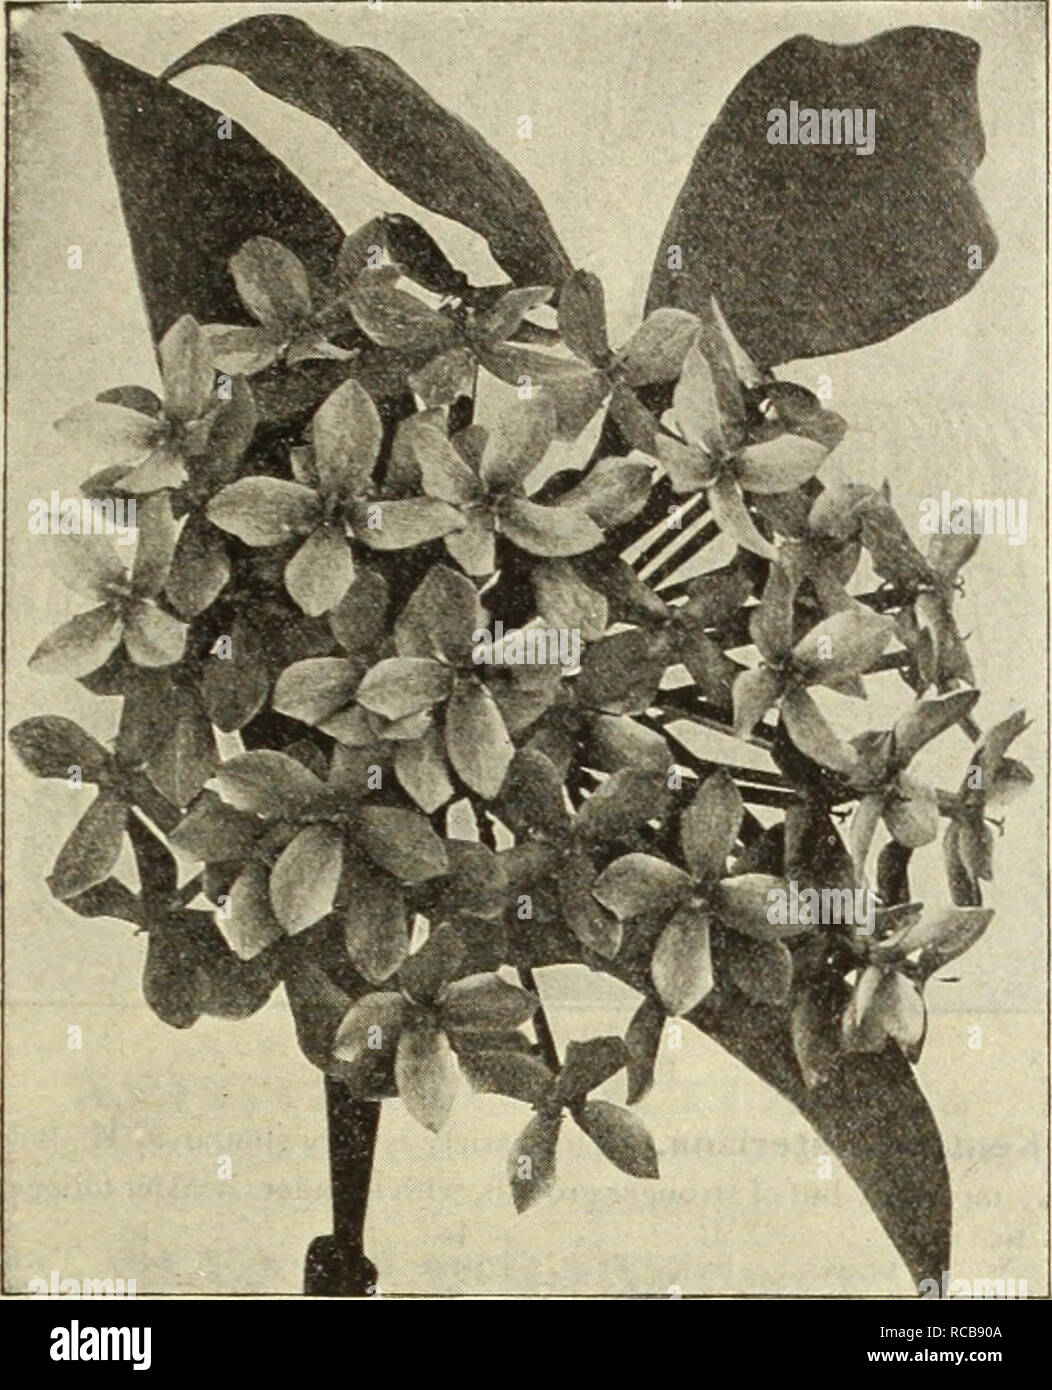 . Dreer's autumn catalogue 1912. Bulbs (Plants) Catalogs; Flowers Seeds Catalogs; Gardening Equipment and supplies Catalogs; Nurseries (Horticulture) Catalogs; Fruit Seeds Catalogs; Vegetables Seeds Catalogs. WADRBR -PnilADaPHIA M•^^iARD!H^&quot;'0R^^t1H0US^ pMUJH 41. IXCRA. IXORAS. These are among the showiest of hothouse flowering plants. The foliage is pretty and attractive, while the flowers, borne in large terminal corymbs, are shaped somewhat like a Bouvardia. Acuminata. Fragrant, pure white flowers. Coccinea. Bright red, in very large corymbs. Colei. A distinct white variety. Dixiana. D Stock Photo